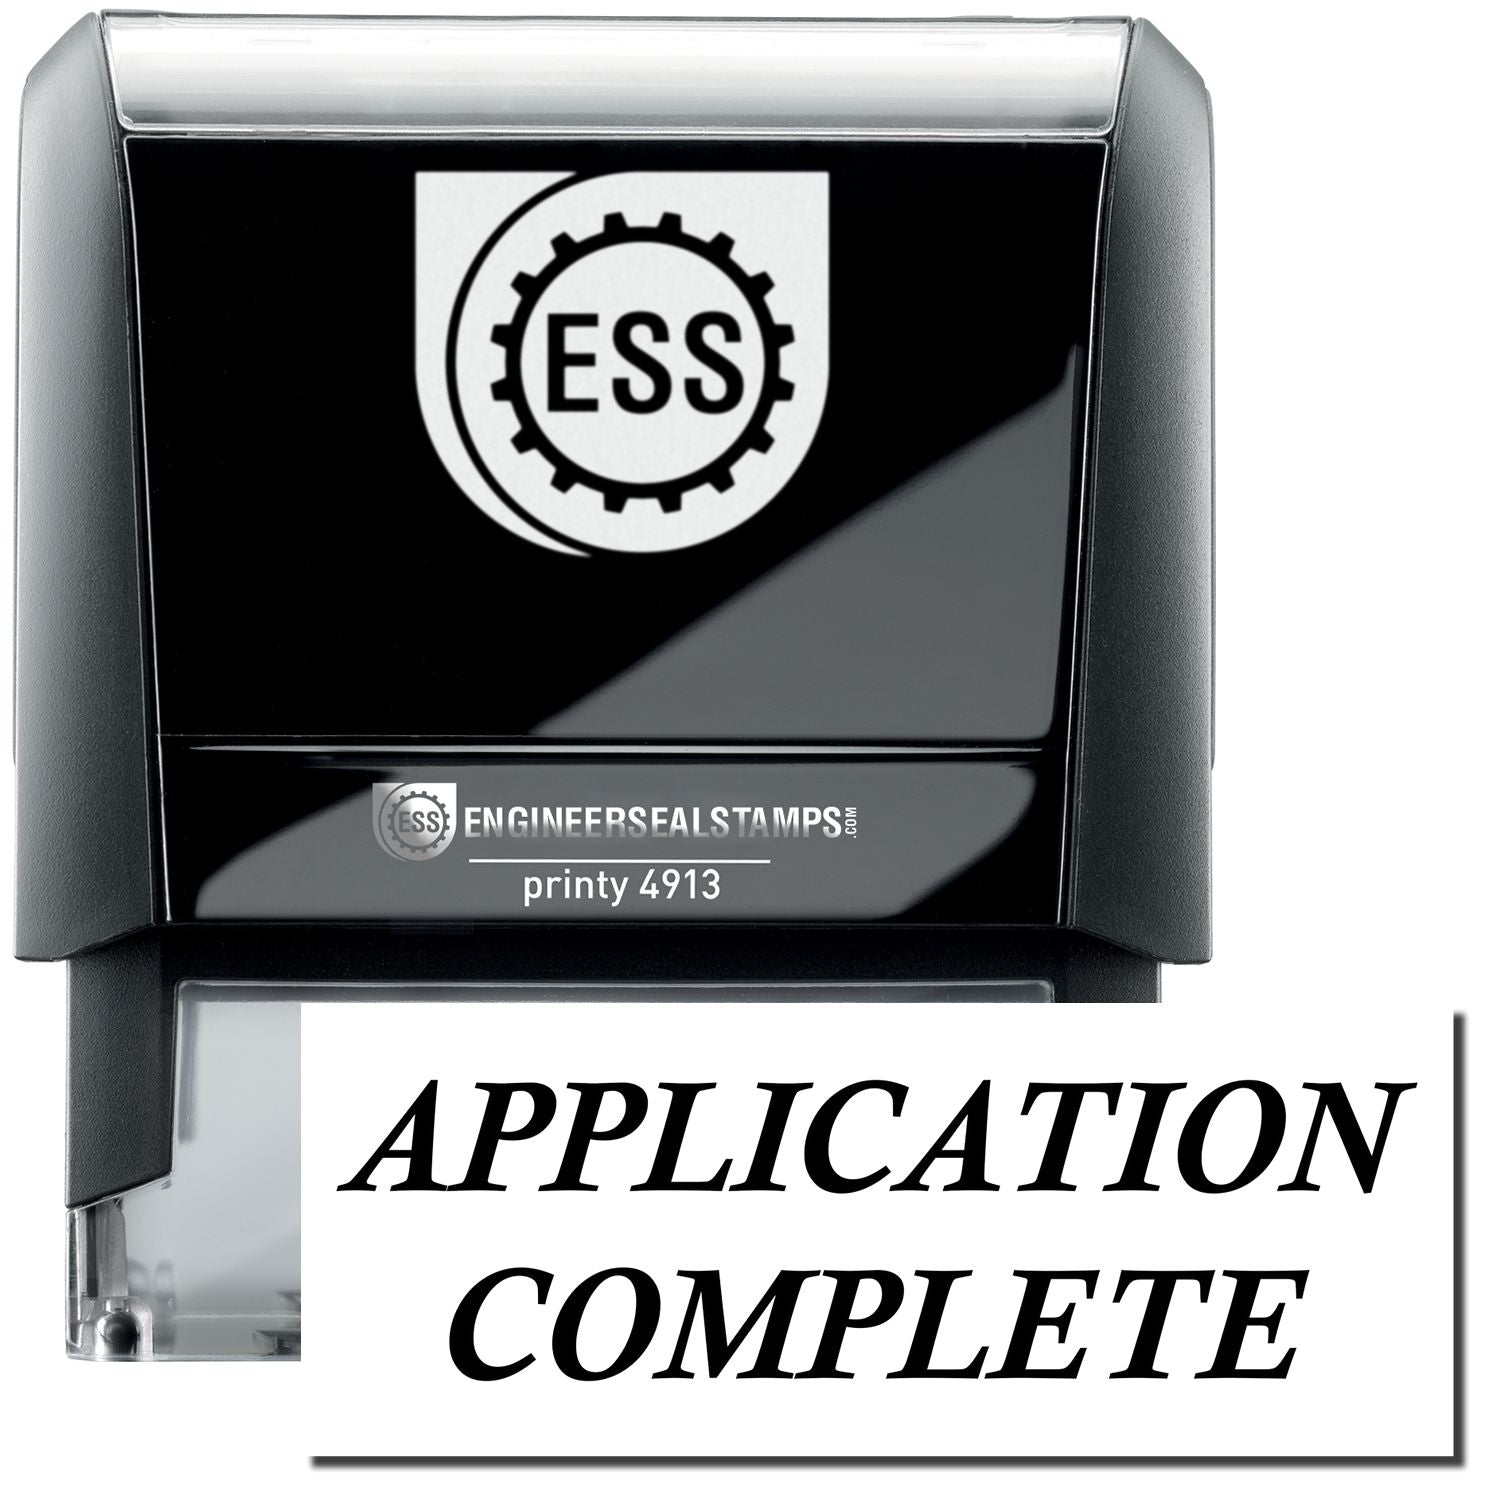 A self-inking stamp with a stamped image showing how the text "APPLICATION COMPLETE" in a large italic bold font is displayed by it.